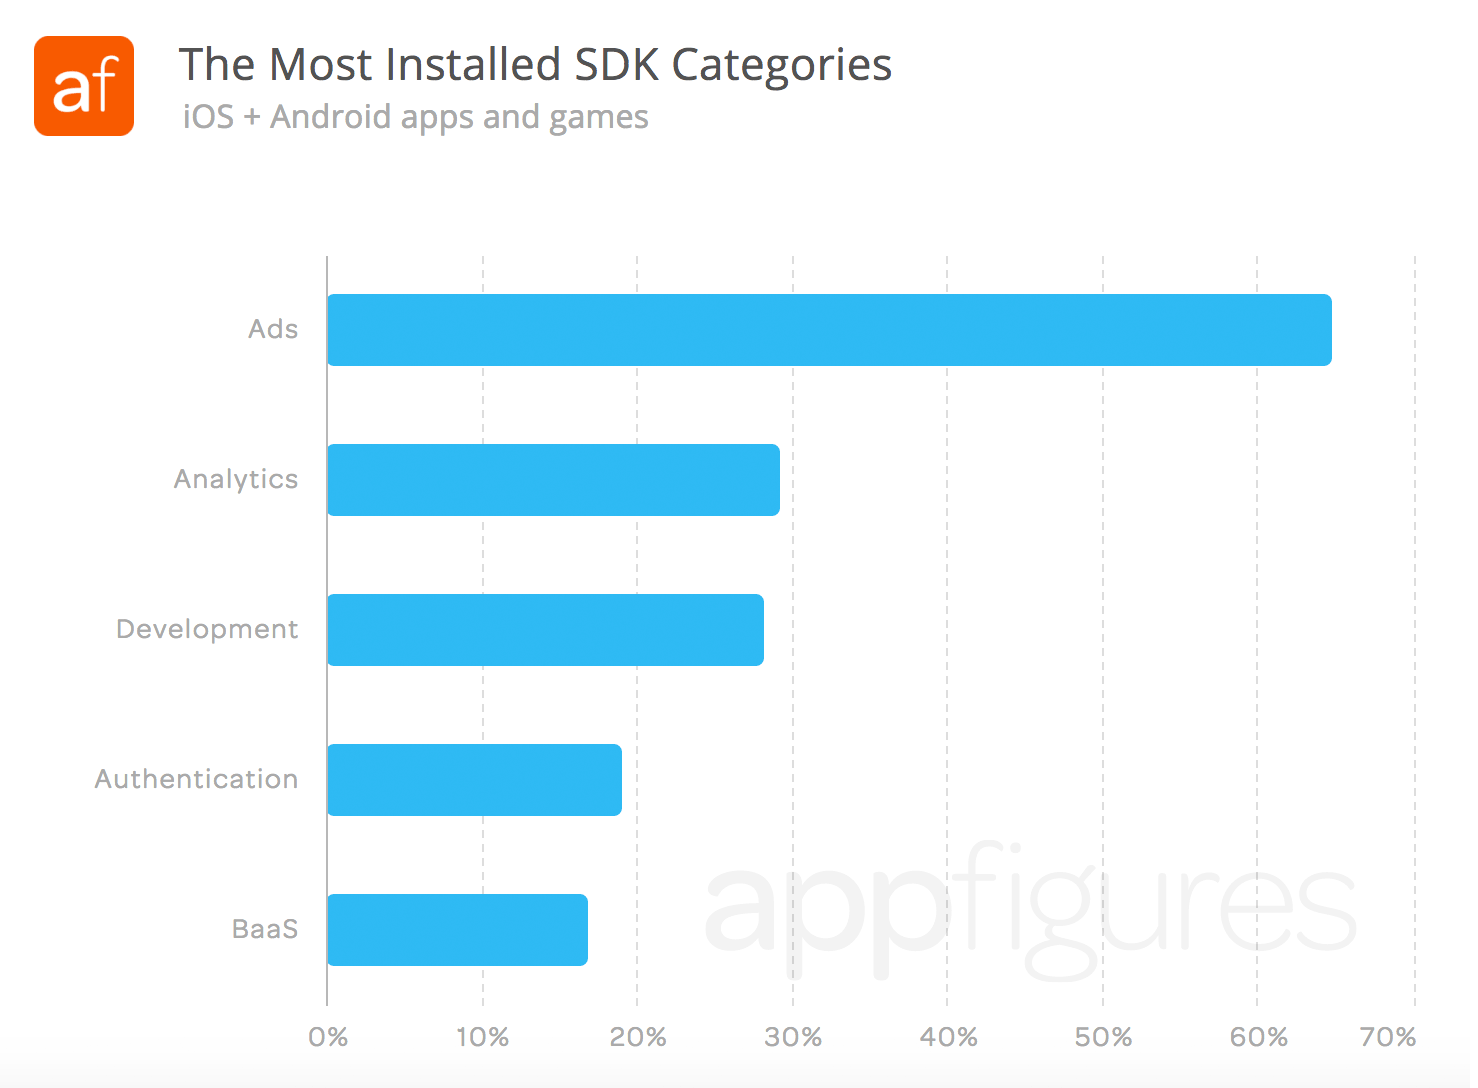 Most installed types of SDKs